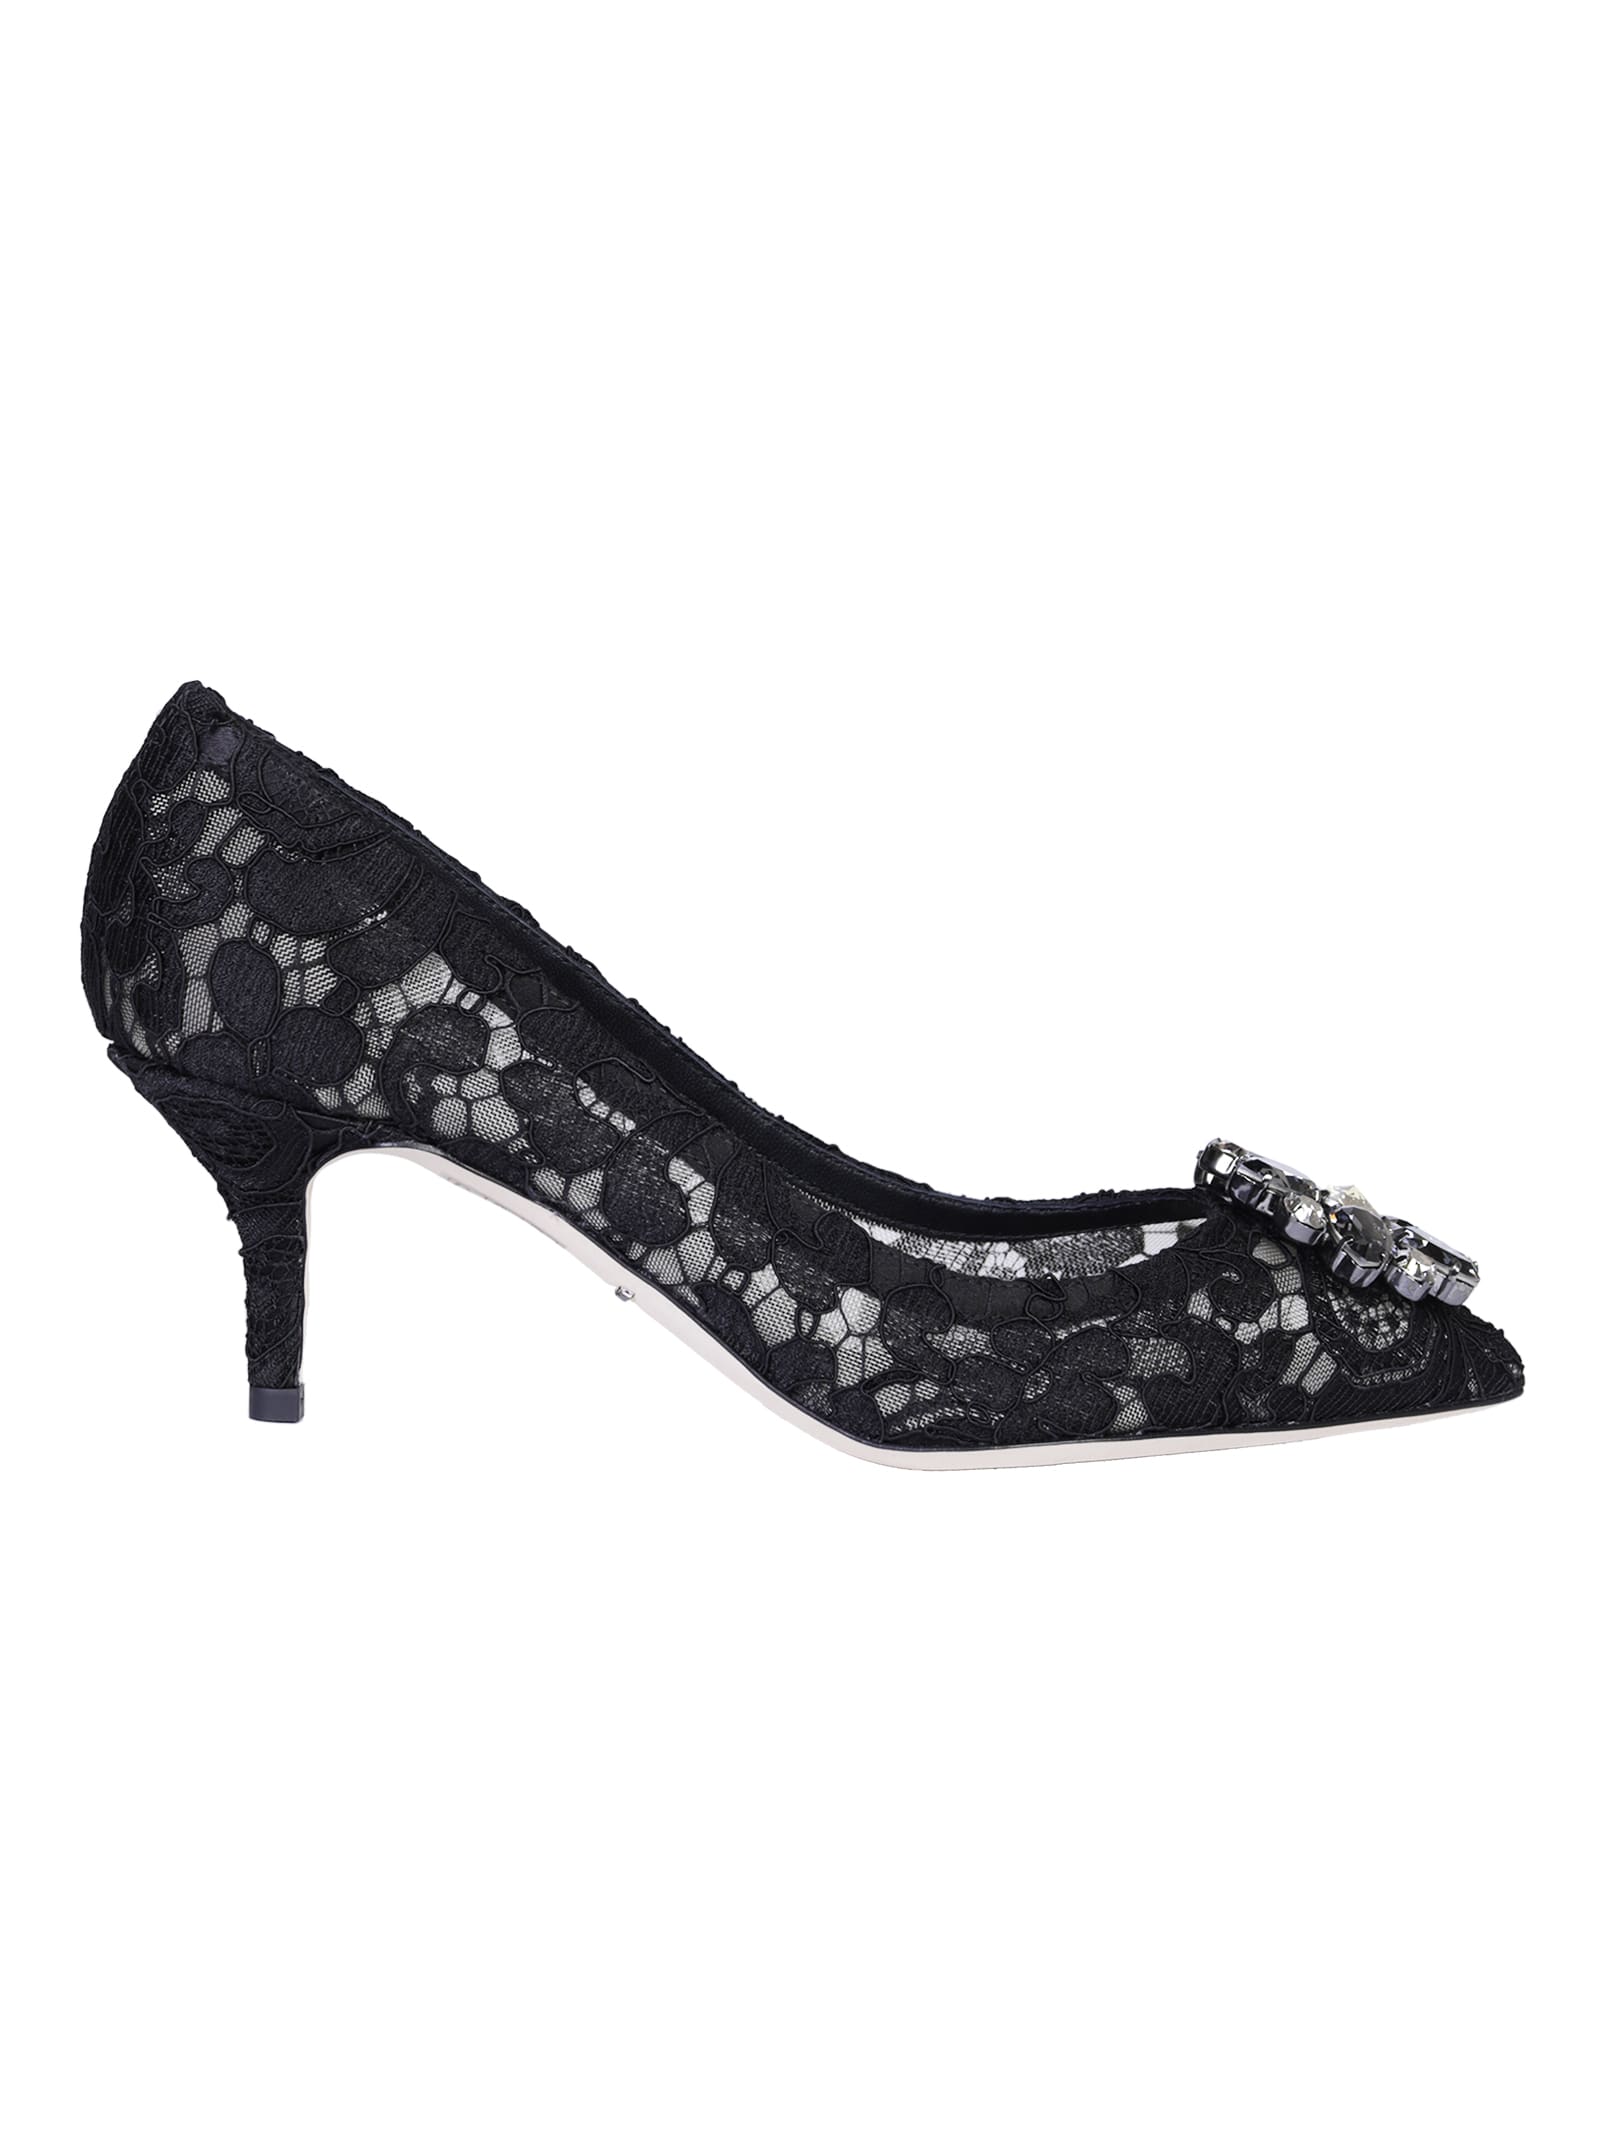 Dolce & Gabbana Embroidered Pumps In Black